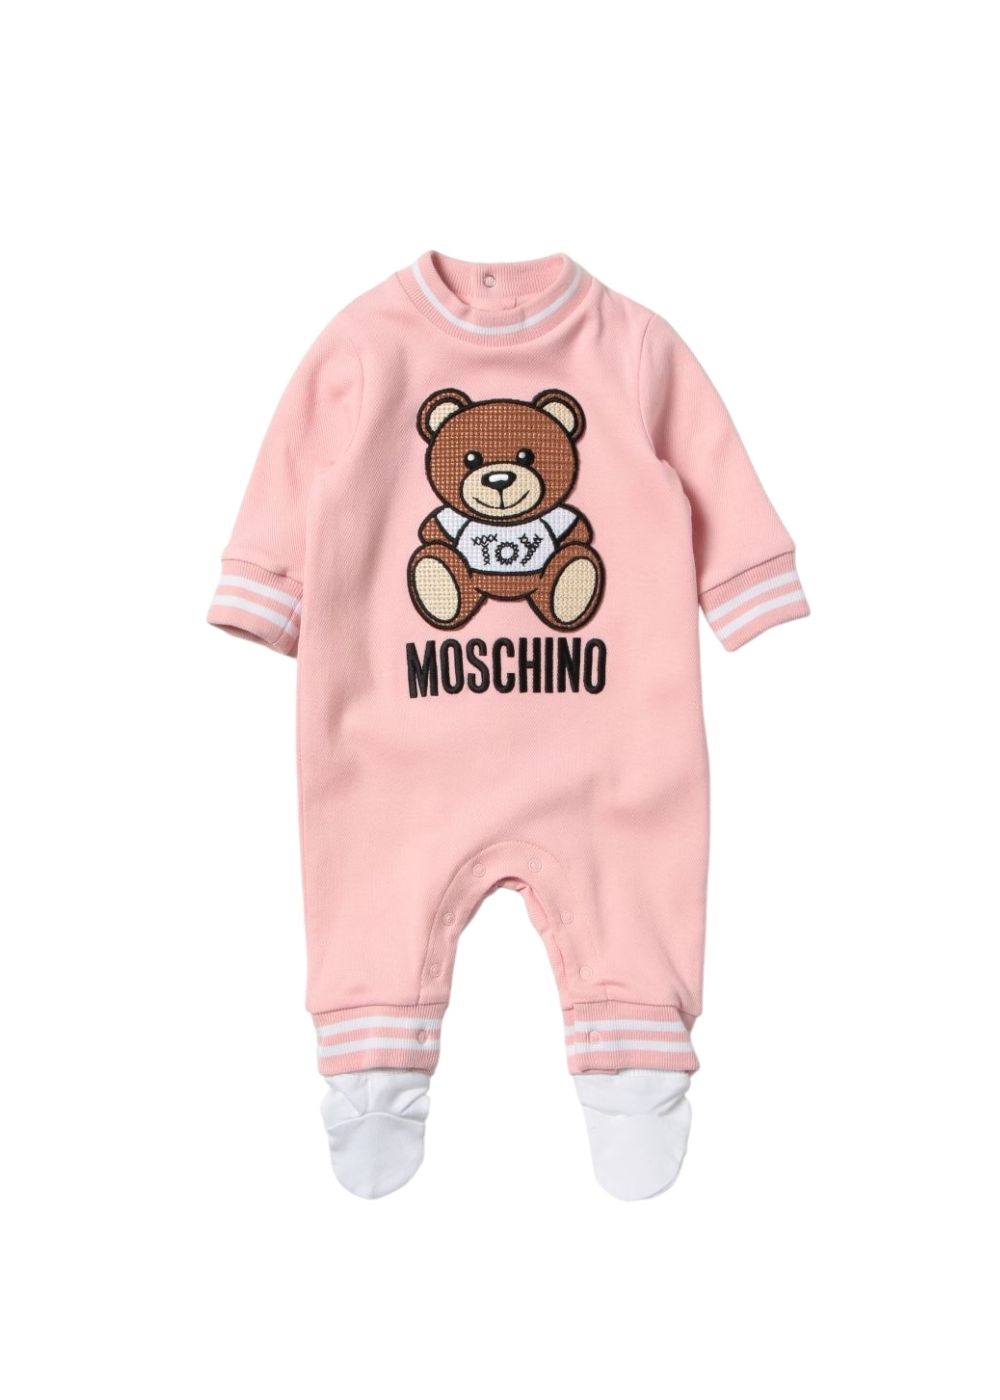 Featured image for “Moschino Tutina Orsetto”